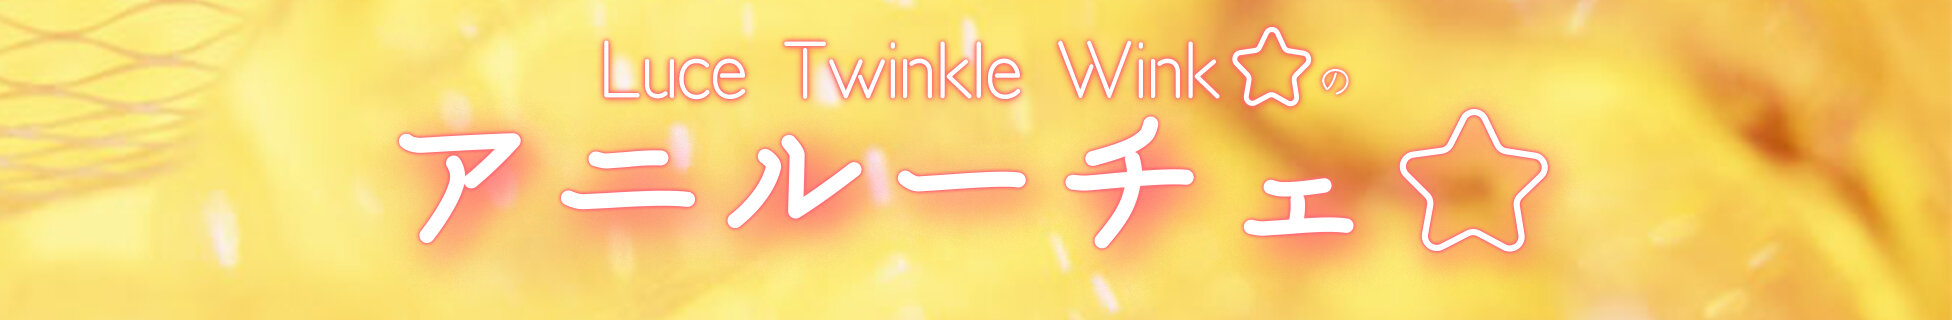 Luce Twinkle Wink☆のアニルーチェ☆